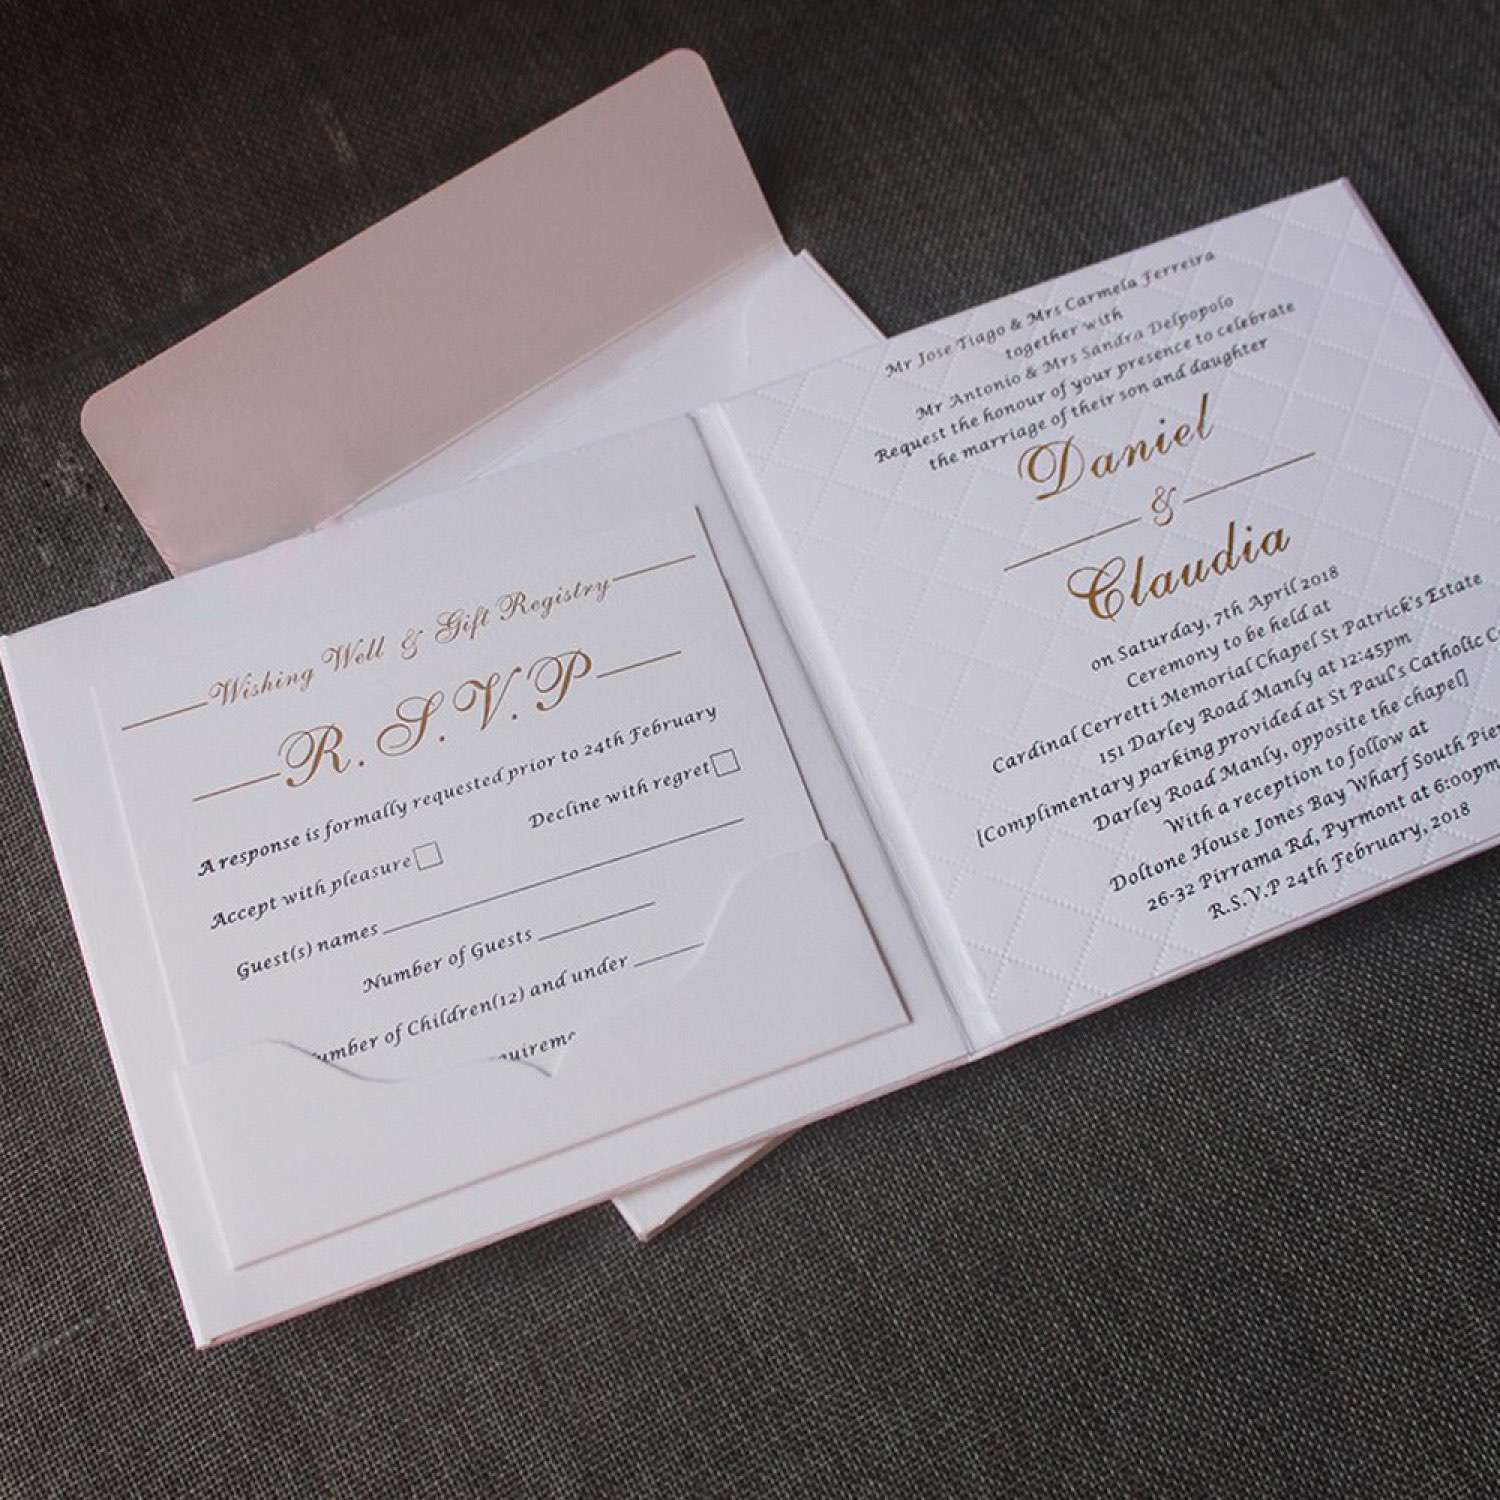 Foiling Invitation Card With Envelope Hard Cover Wedding Invitation Square Card Customized